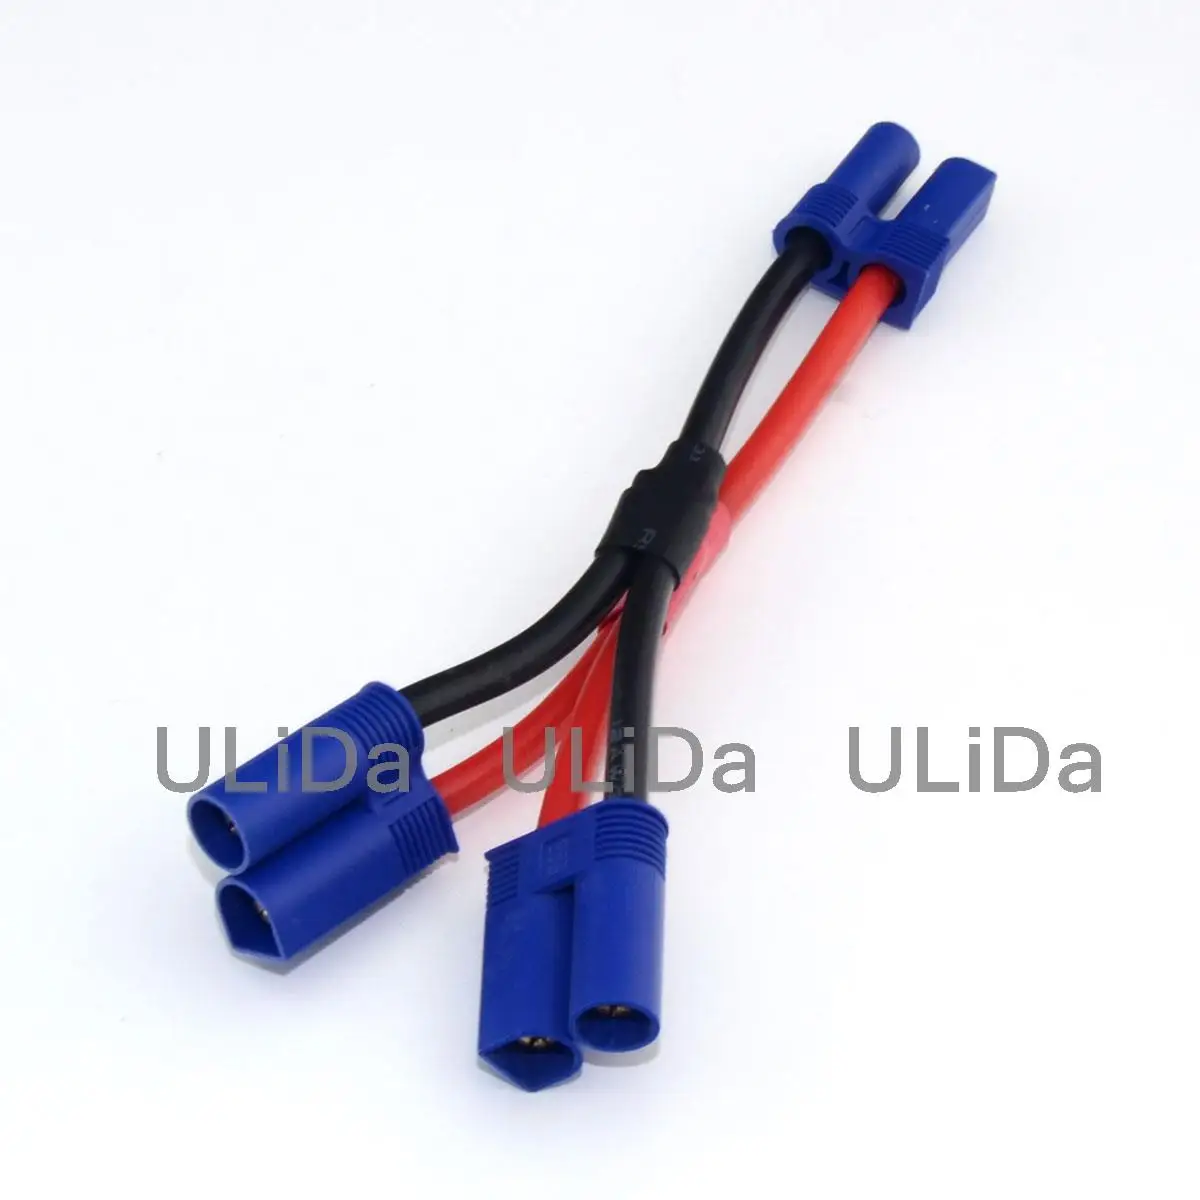 

EC5 Parallel (2 Male / 1 Female) Lipo Battery Connector Adapter with 10CM 12awg Wire Y for RC Car FPV Quadcopter Drone UAV Boat